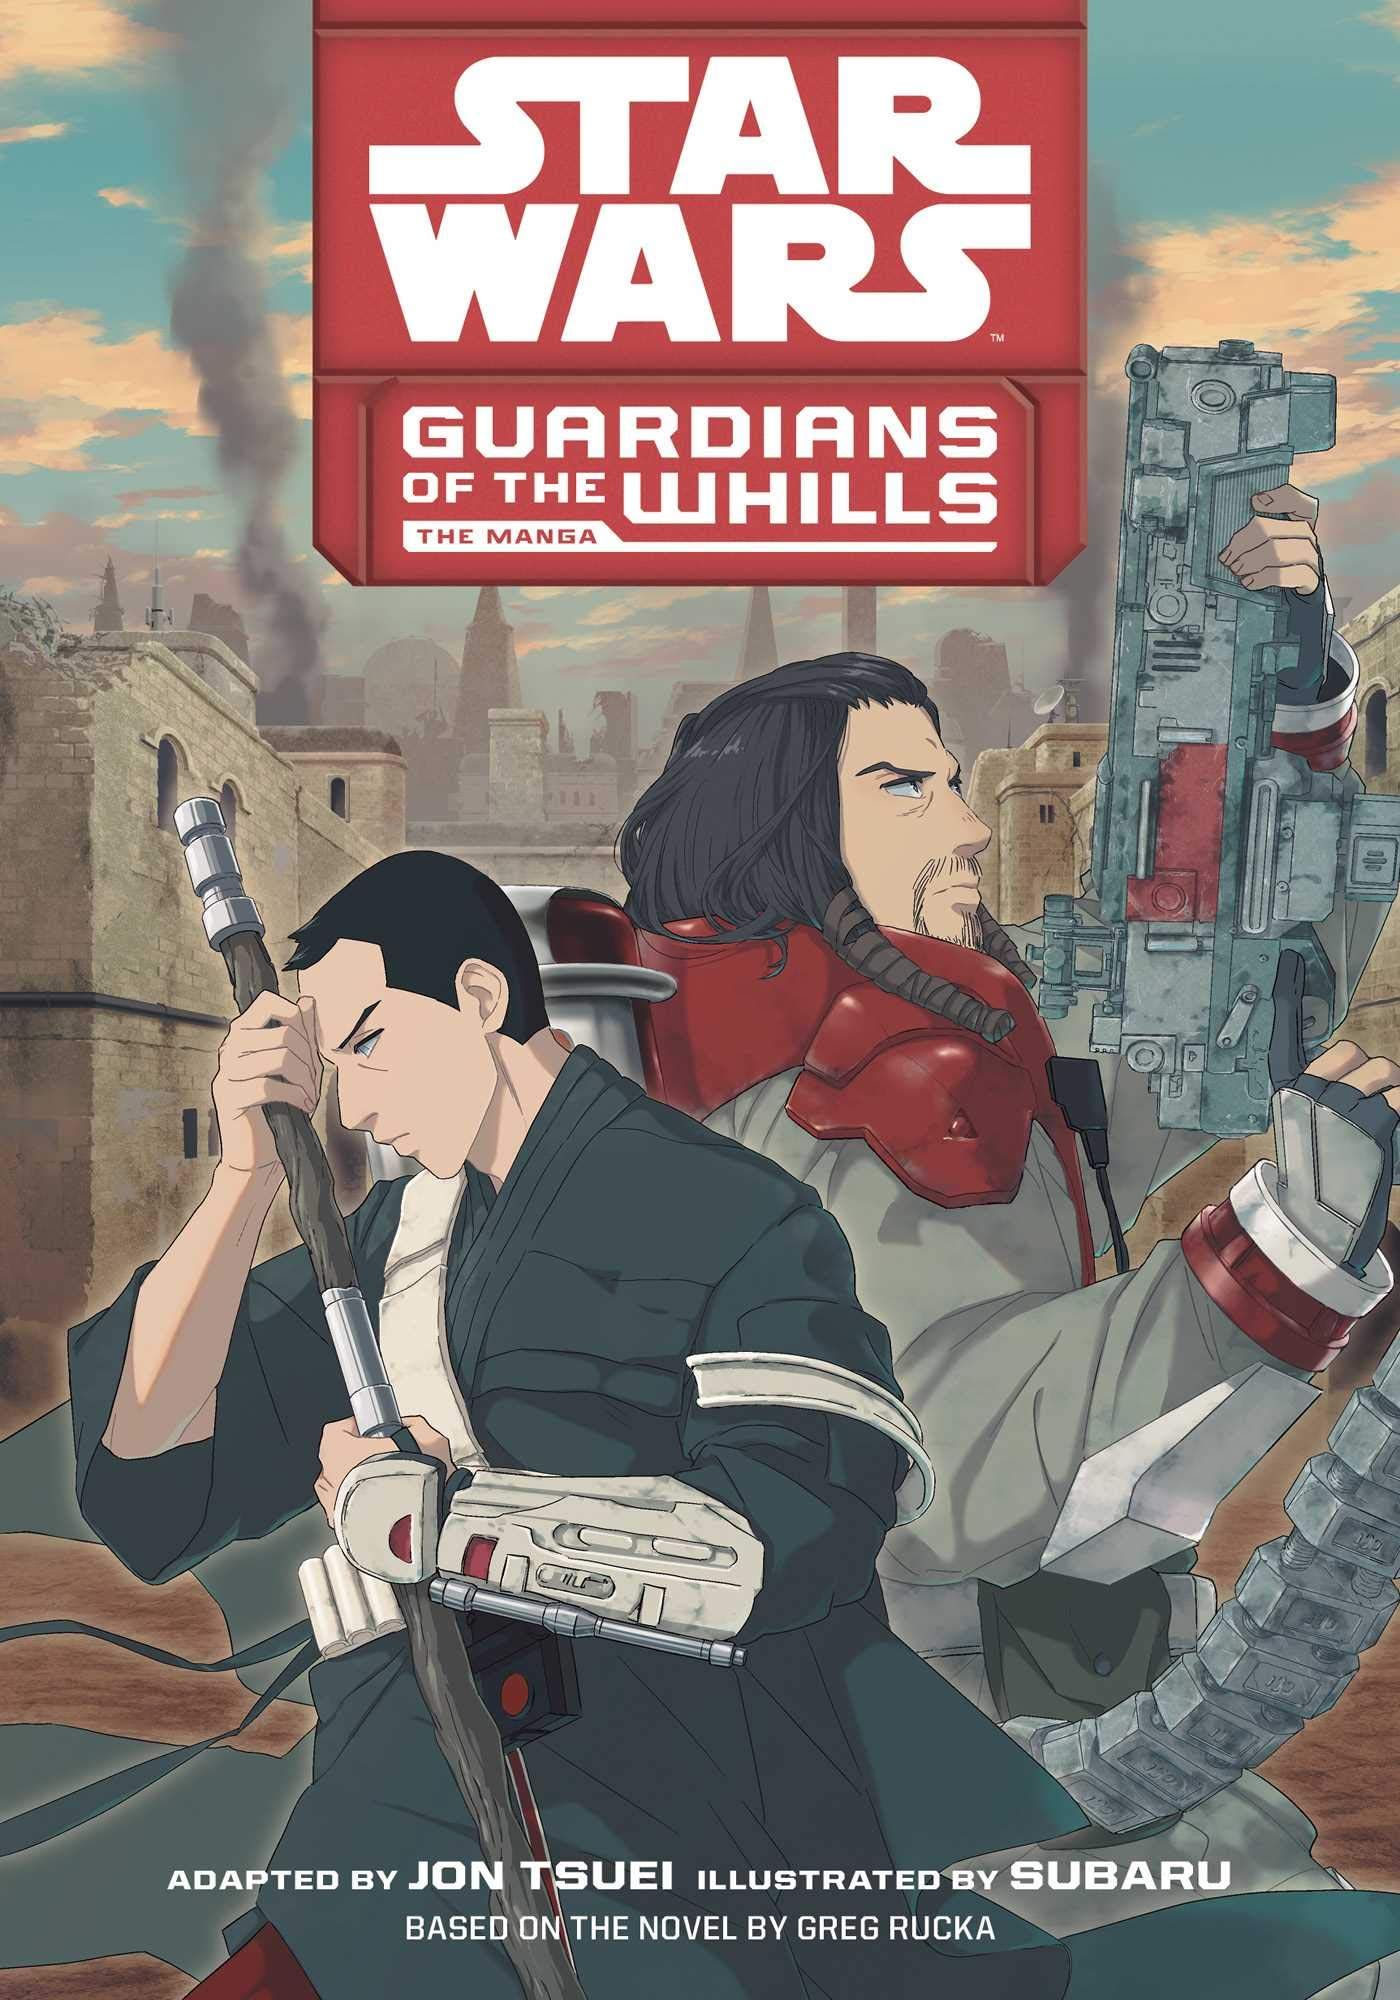 Star Wars Guardians of the Whills: The Manga